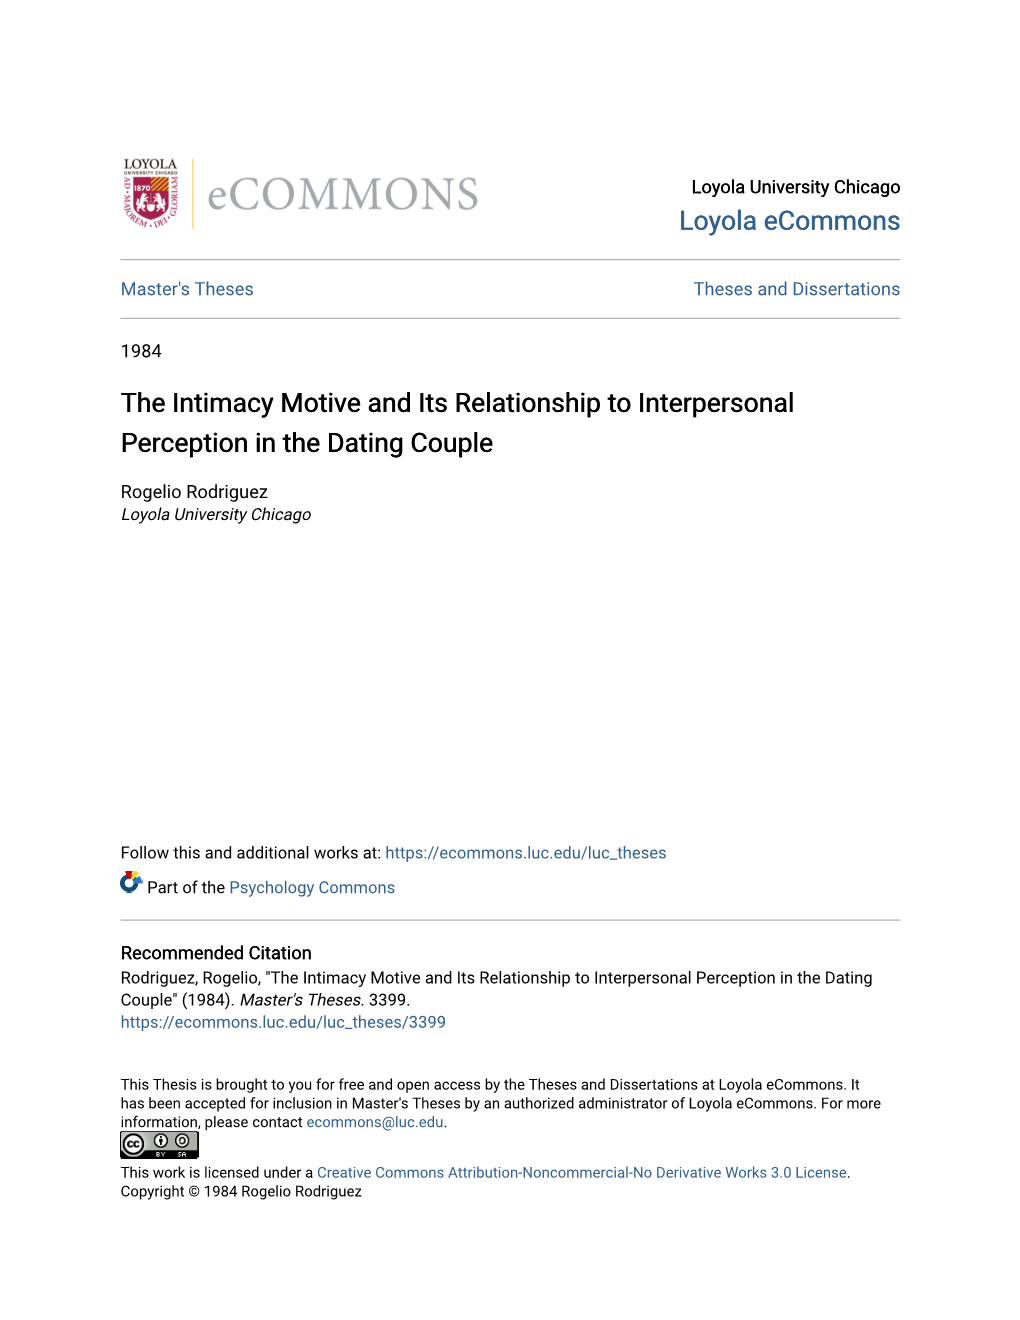 The Intimacy Motive and Its Relationship to Interpersonal Perception in the Dating Couple